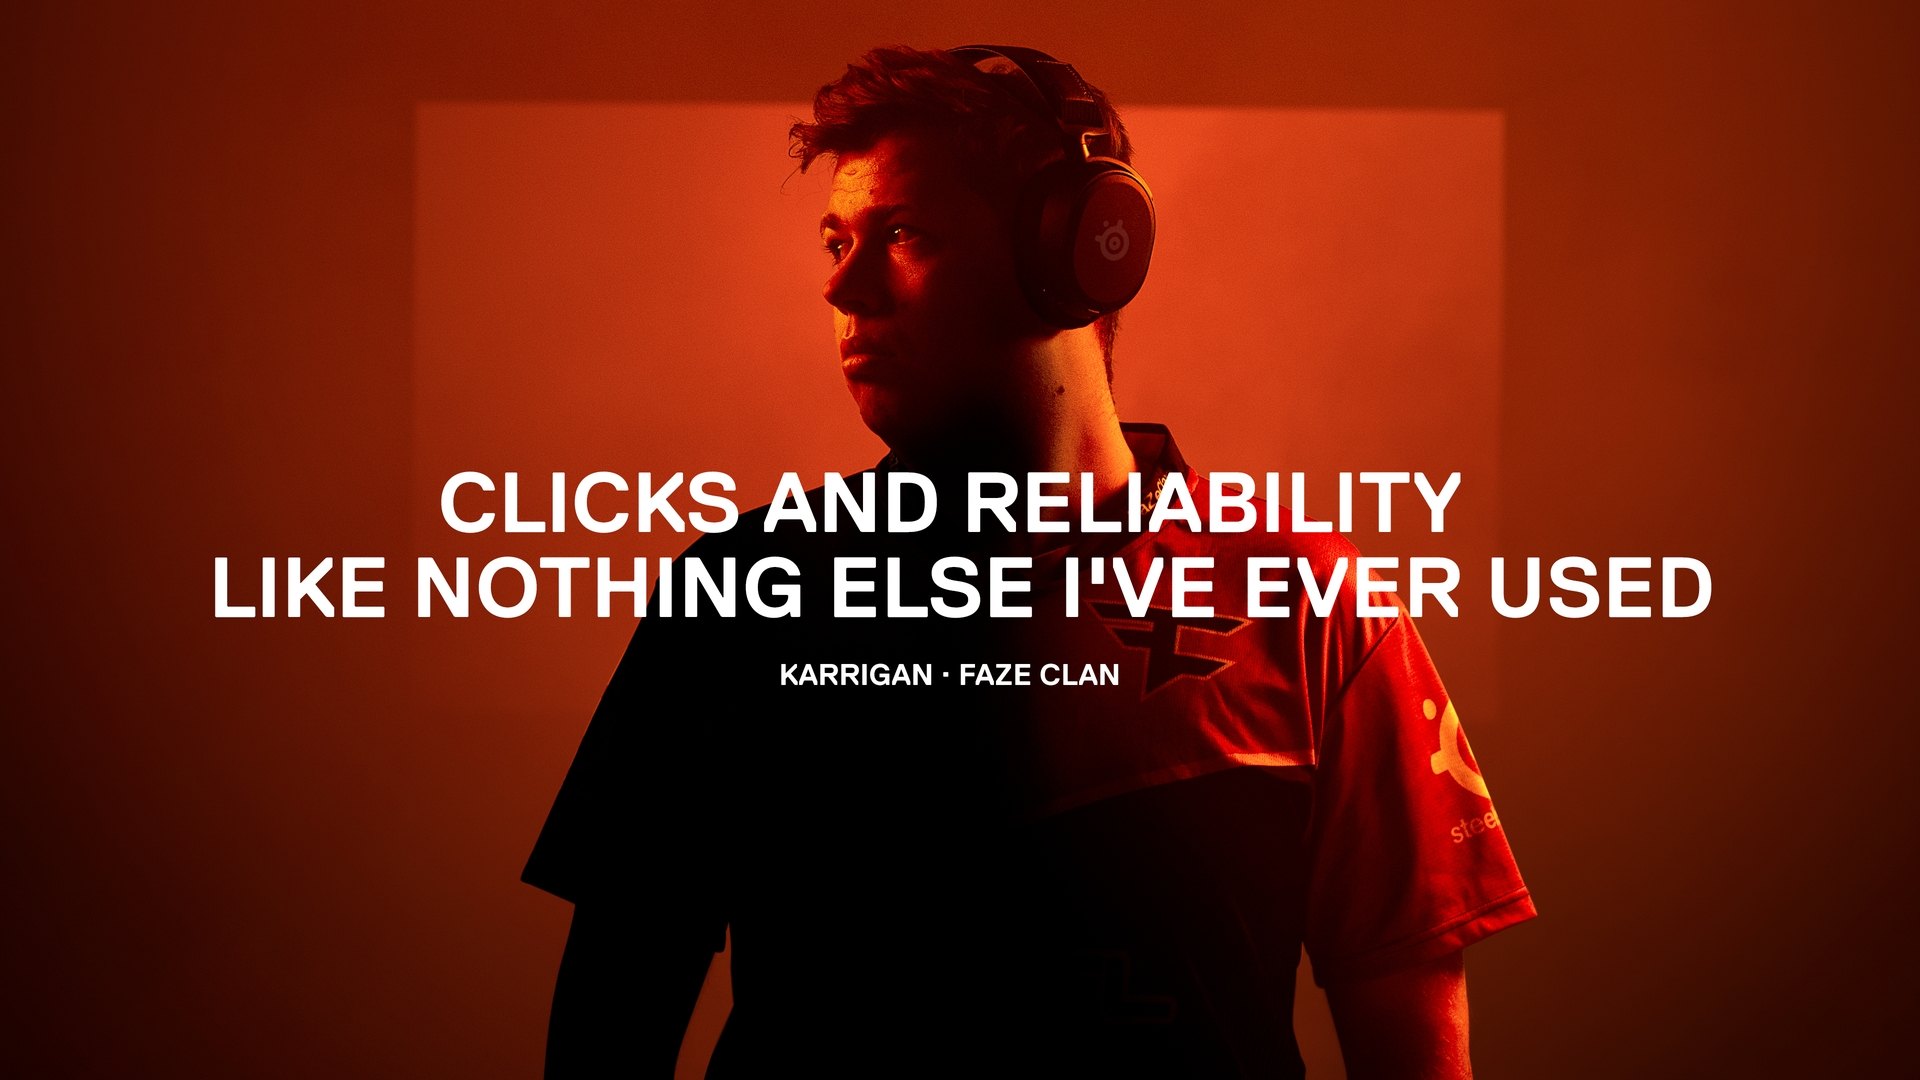 FaZe player Karagan with text that reads "Clicks and reliability like nothing else I've ever used."